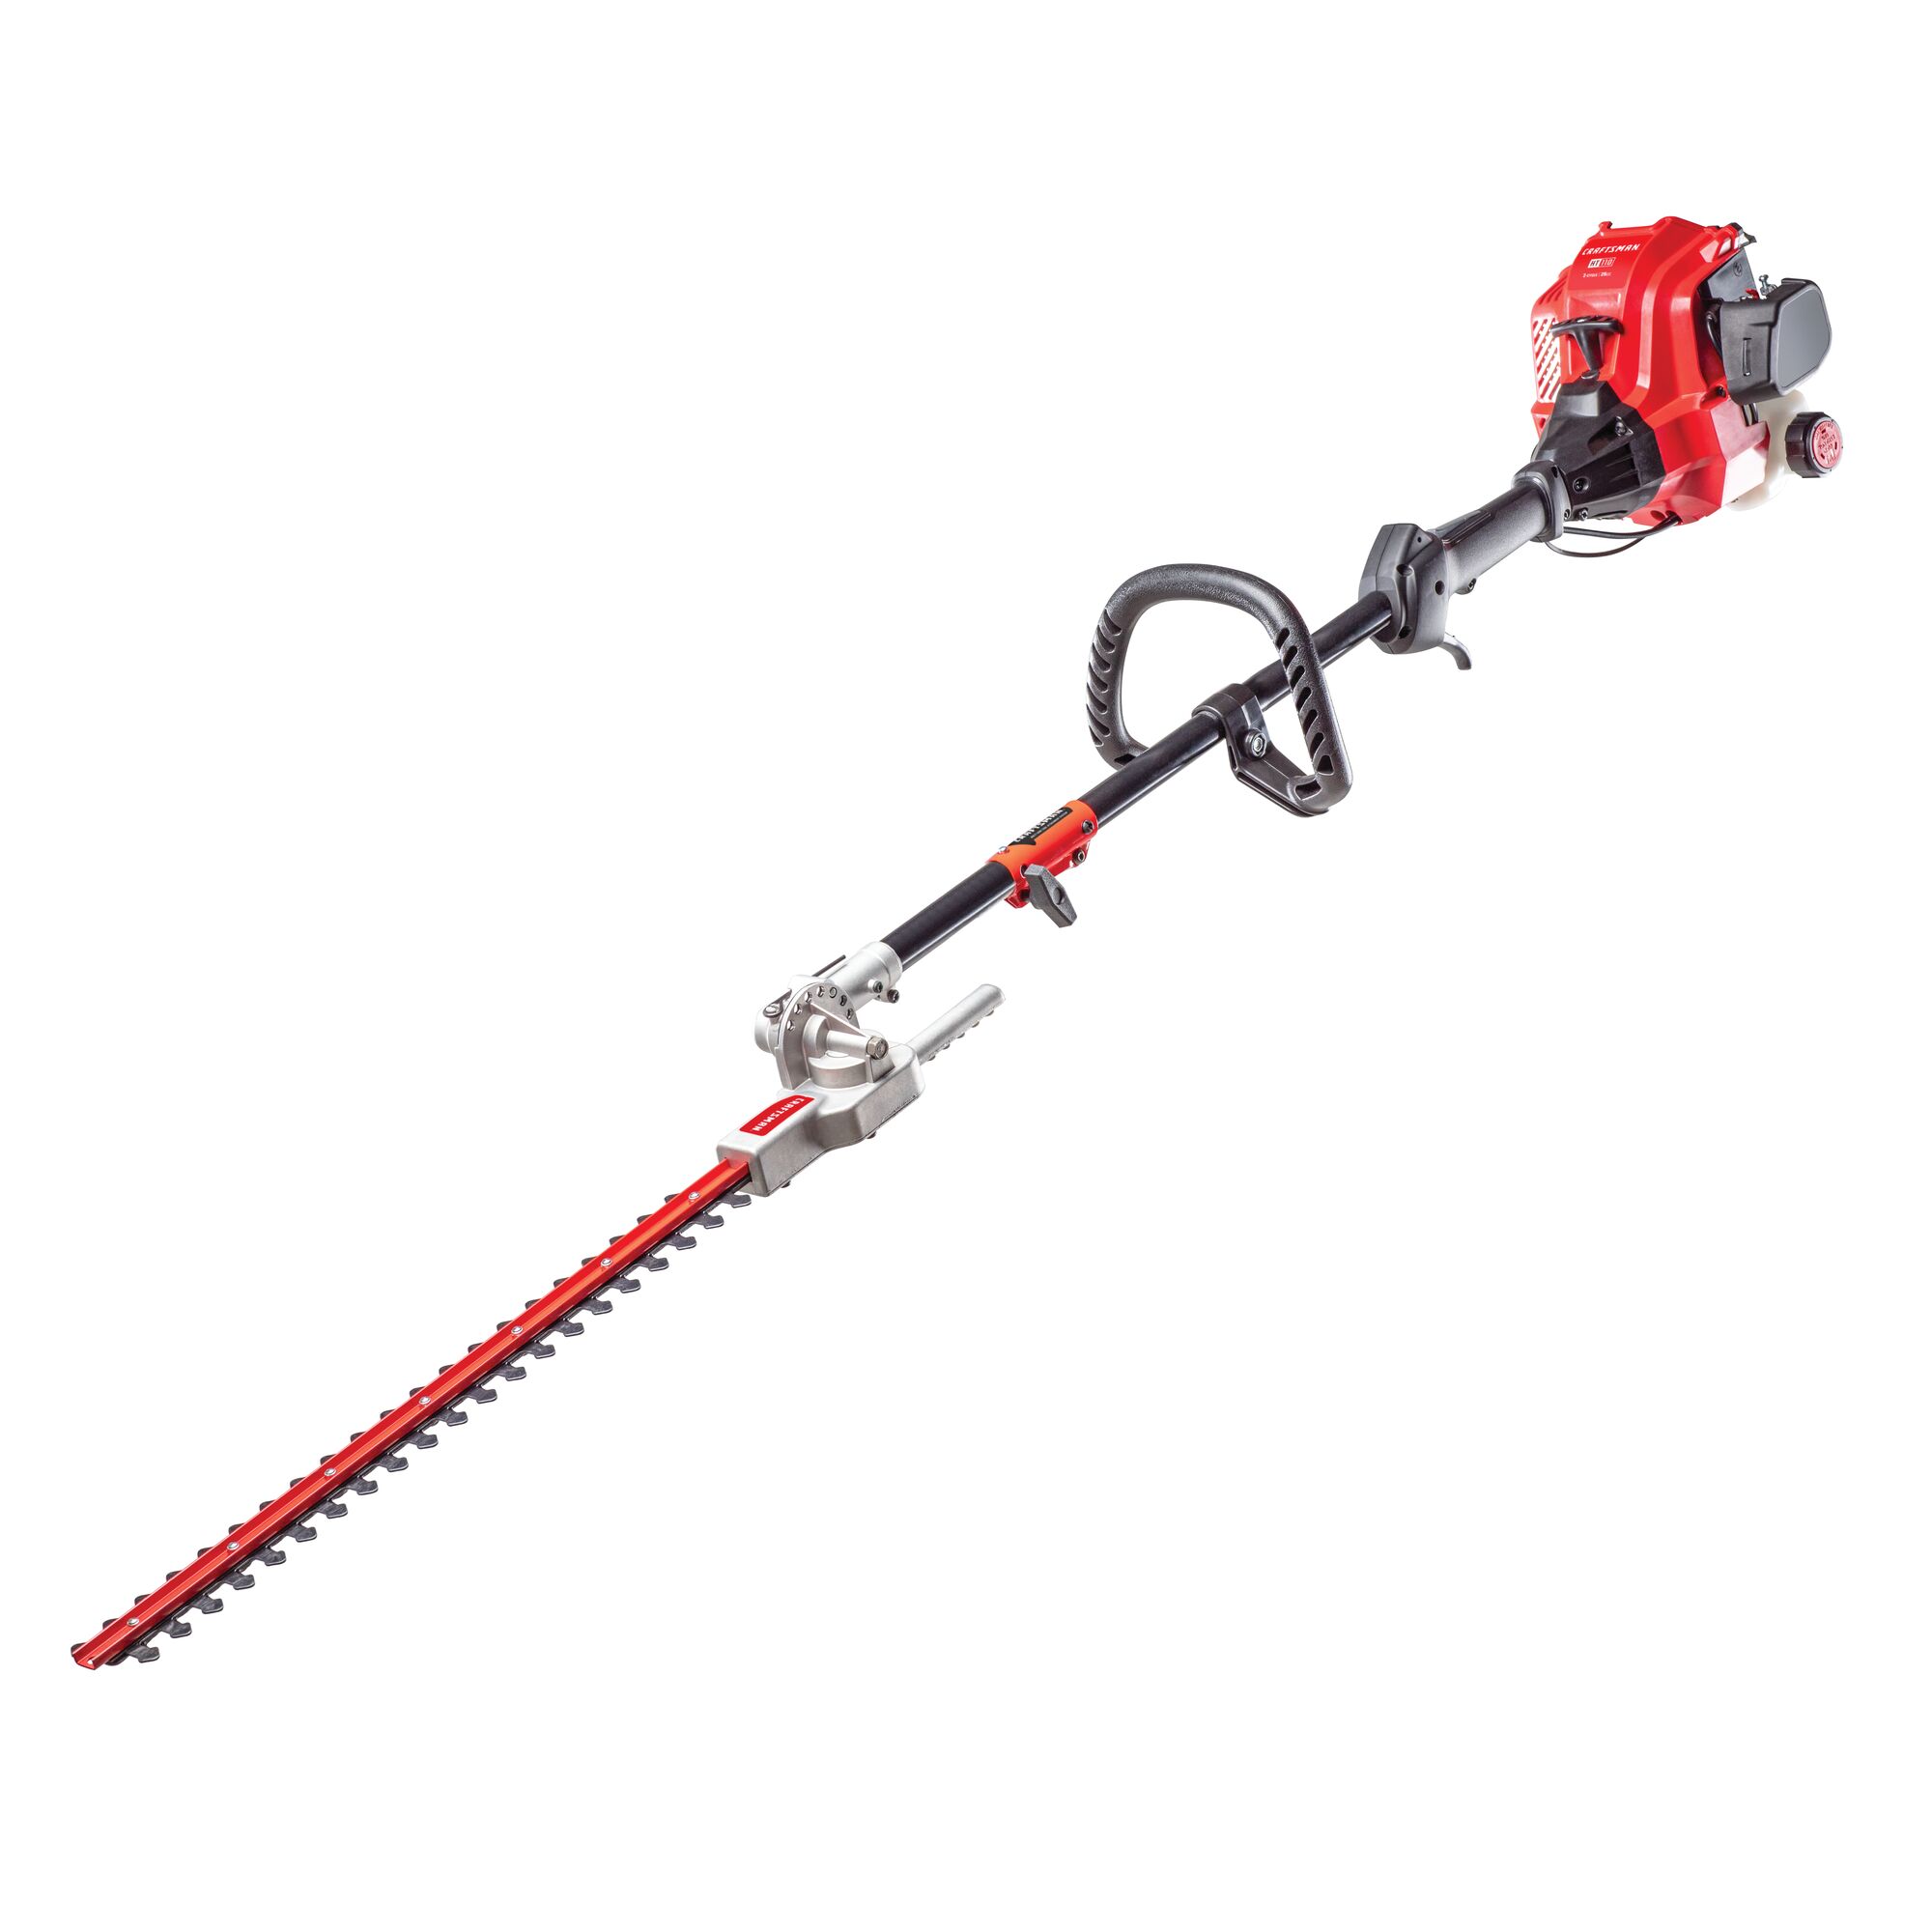 Profile of HT110 25CC 2 cycle 22 inch attachment capable gas hedge trimmer.